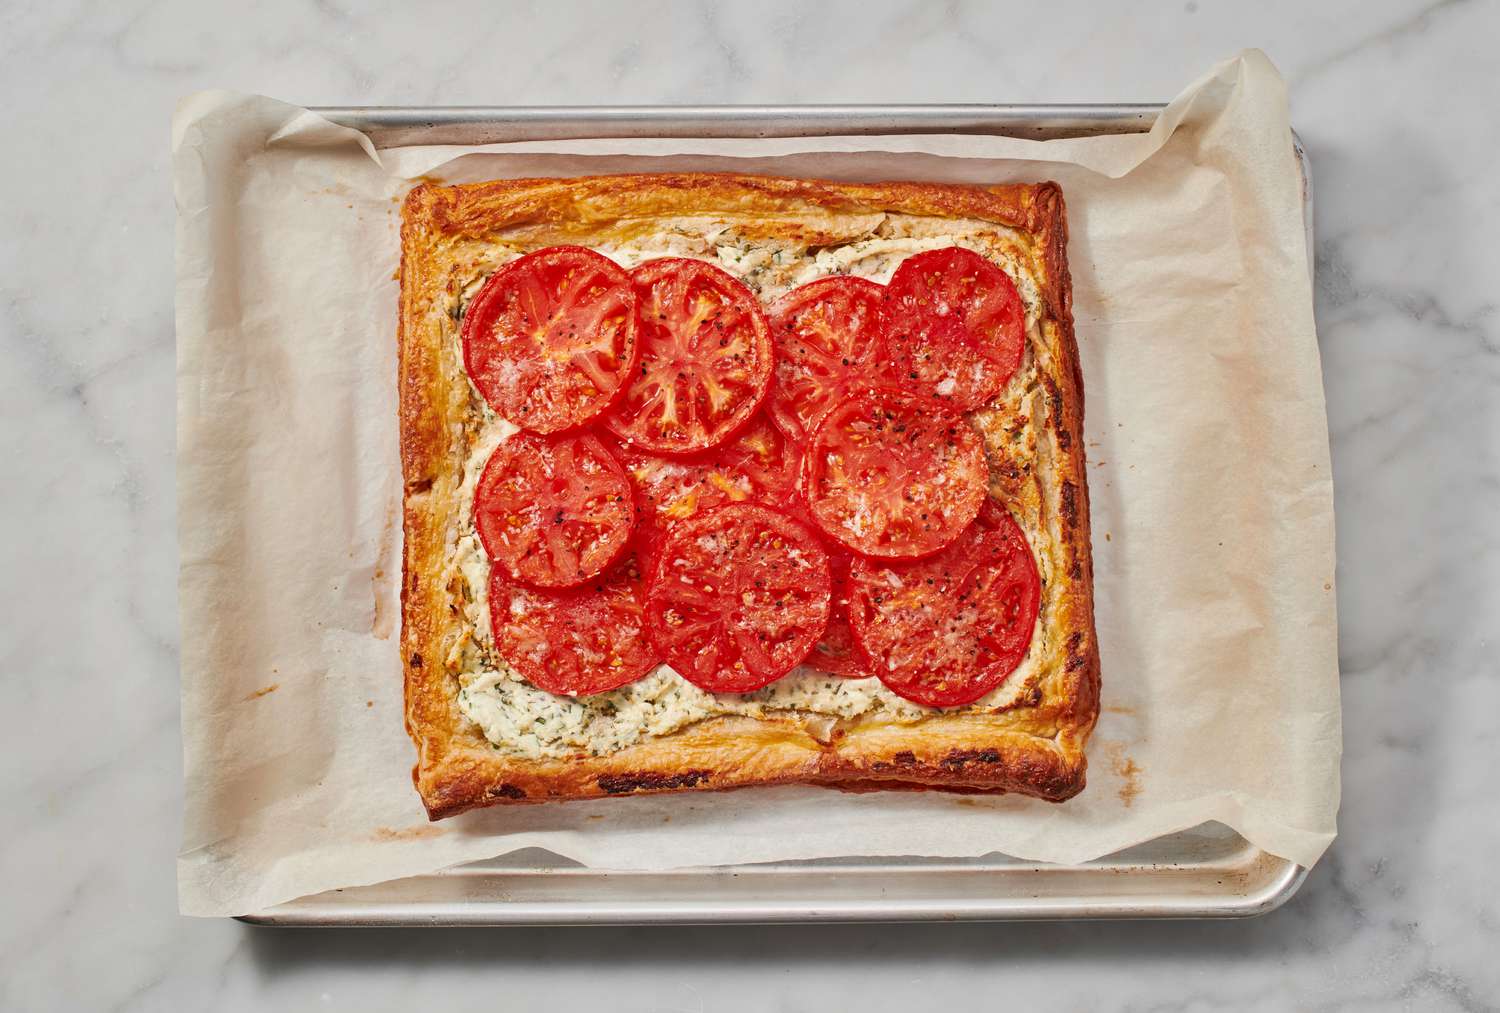 A fully baked puff pastry tomato tart